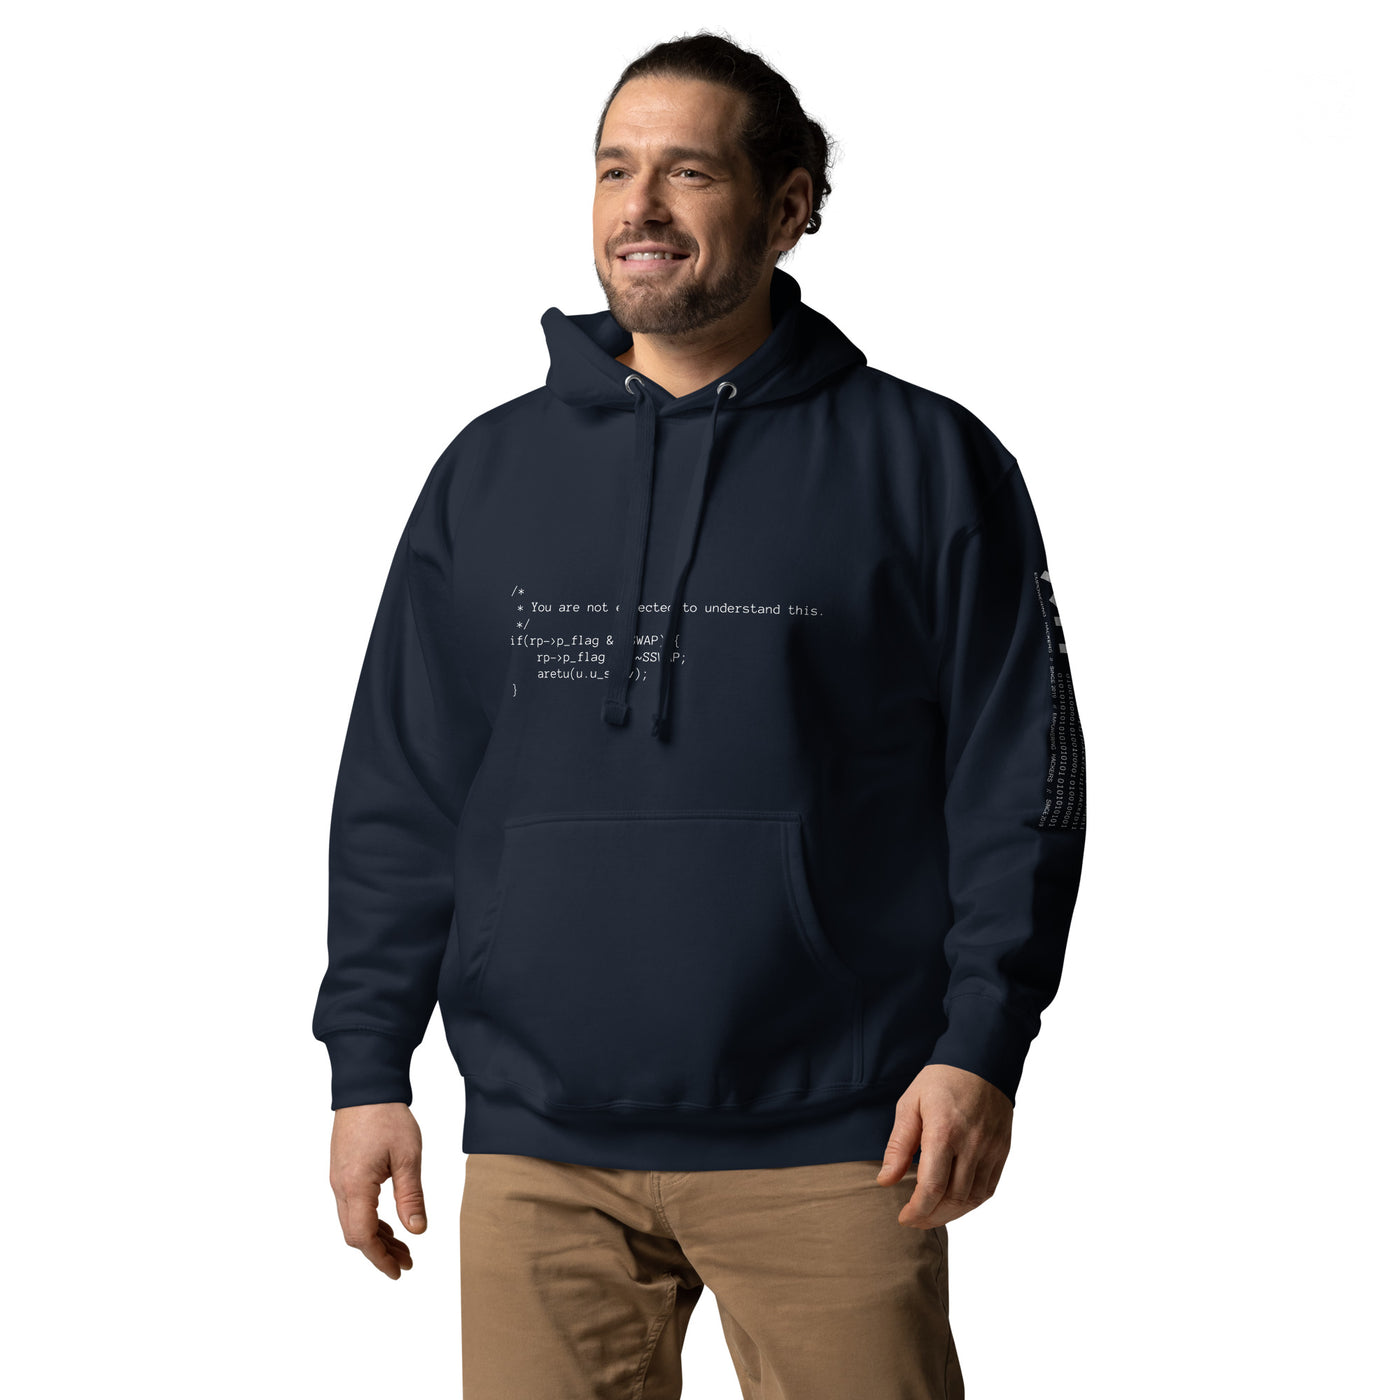 You are not expected to Understand this V1 - Unisex Hoodie